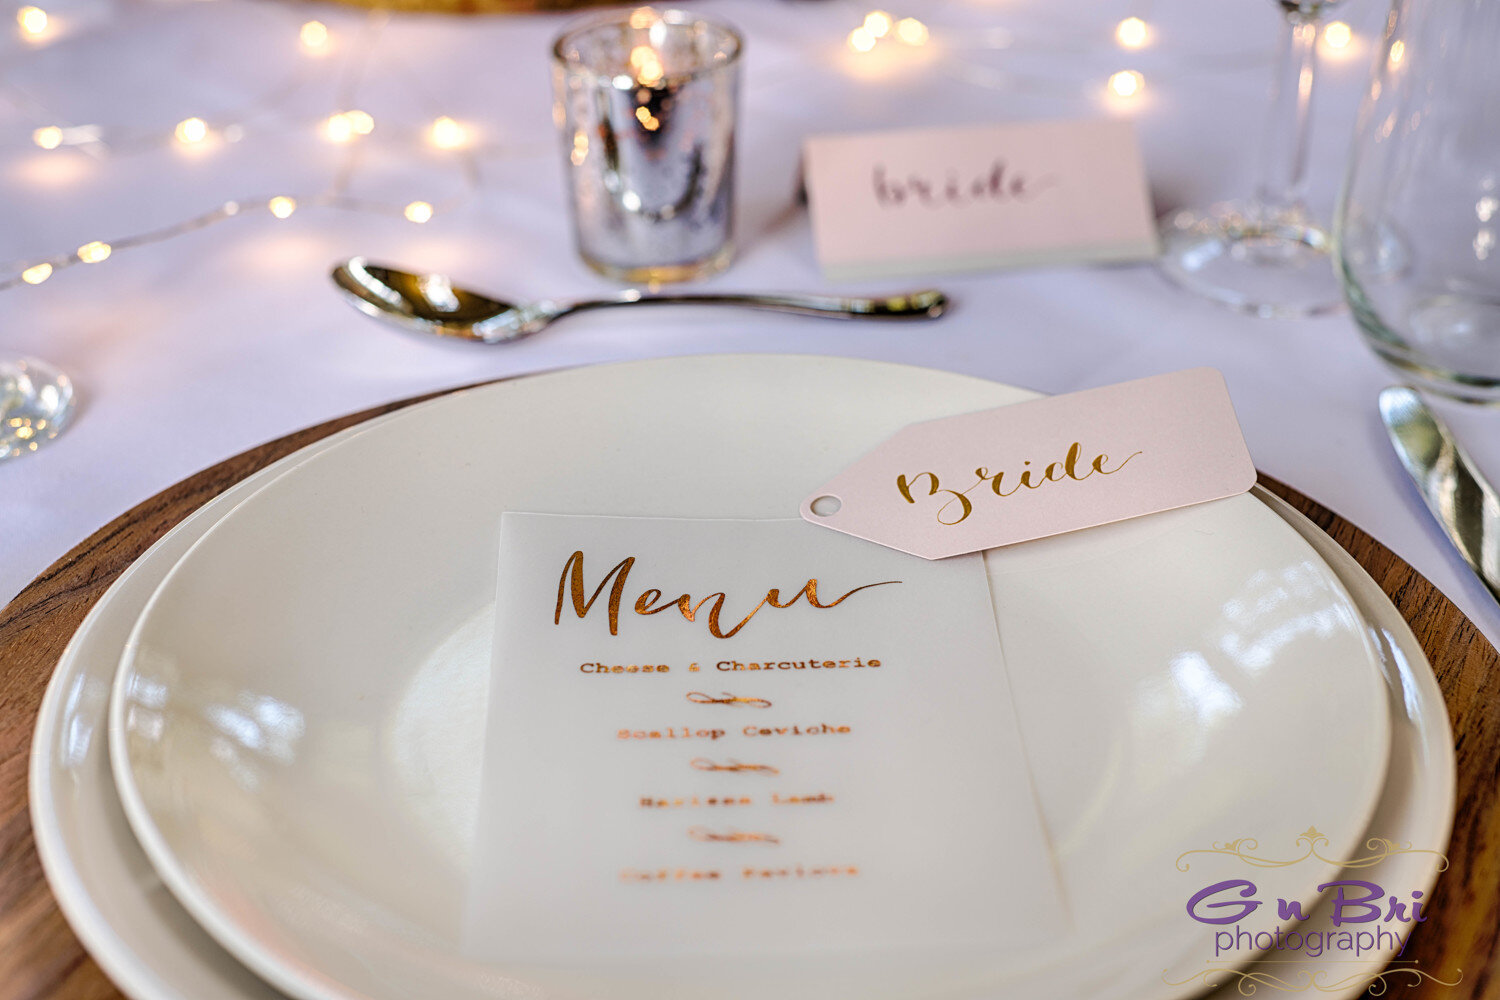 Scapescape_Wedding Inspiration_Table Centrepiece_On the day Stationery_Menu_GnBri Photography